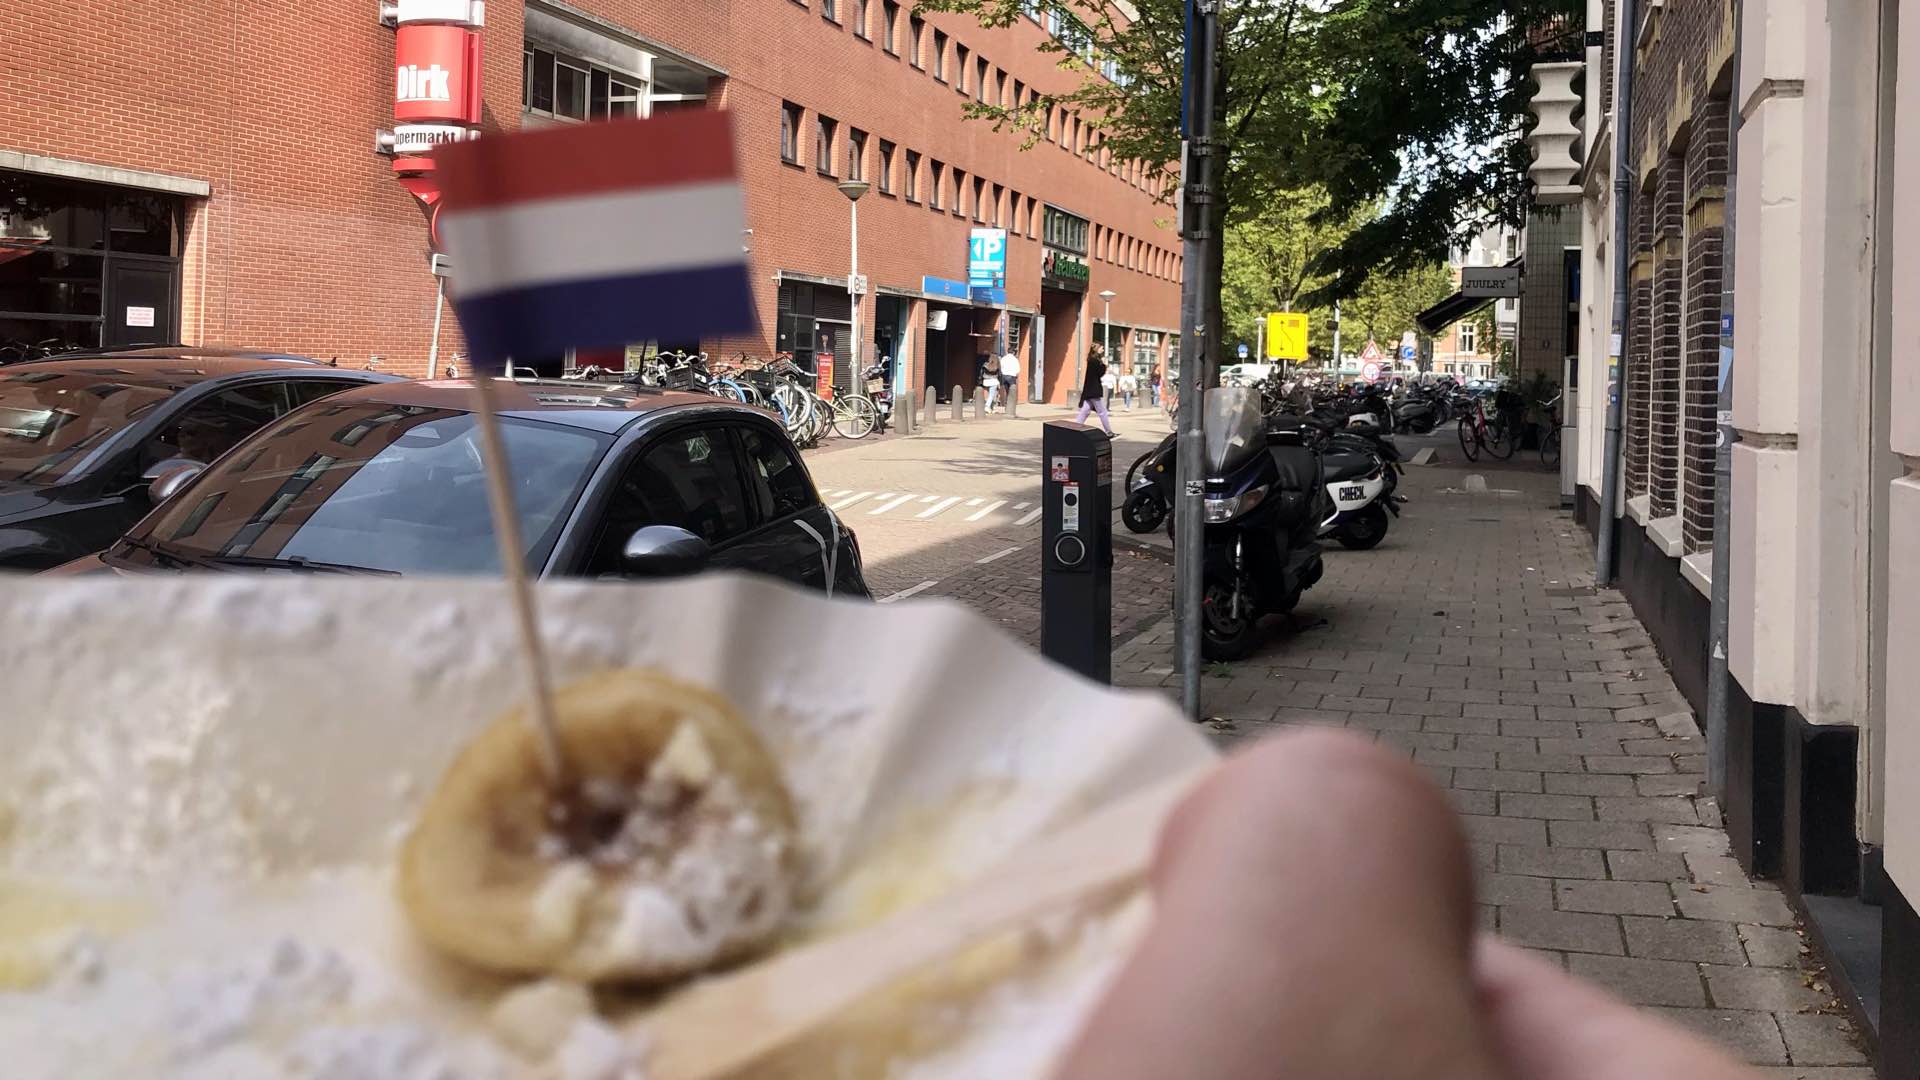 Financial Mechanic insisted we celebrate an Amsterdam visit with fresh hot mini-pancakes, a local specialty—Pofferetjes!